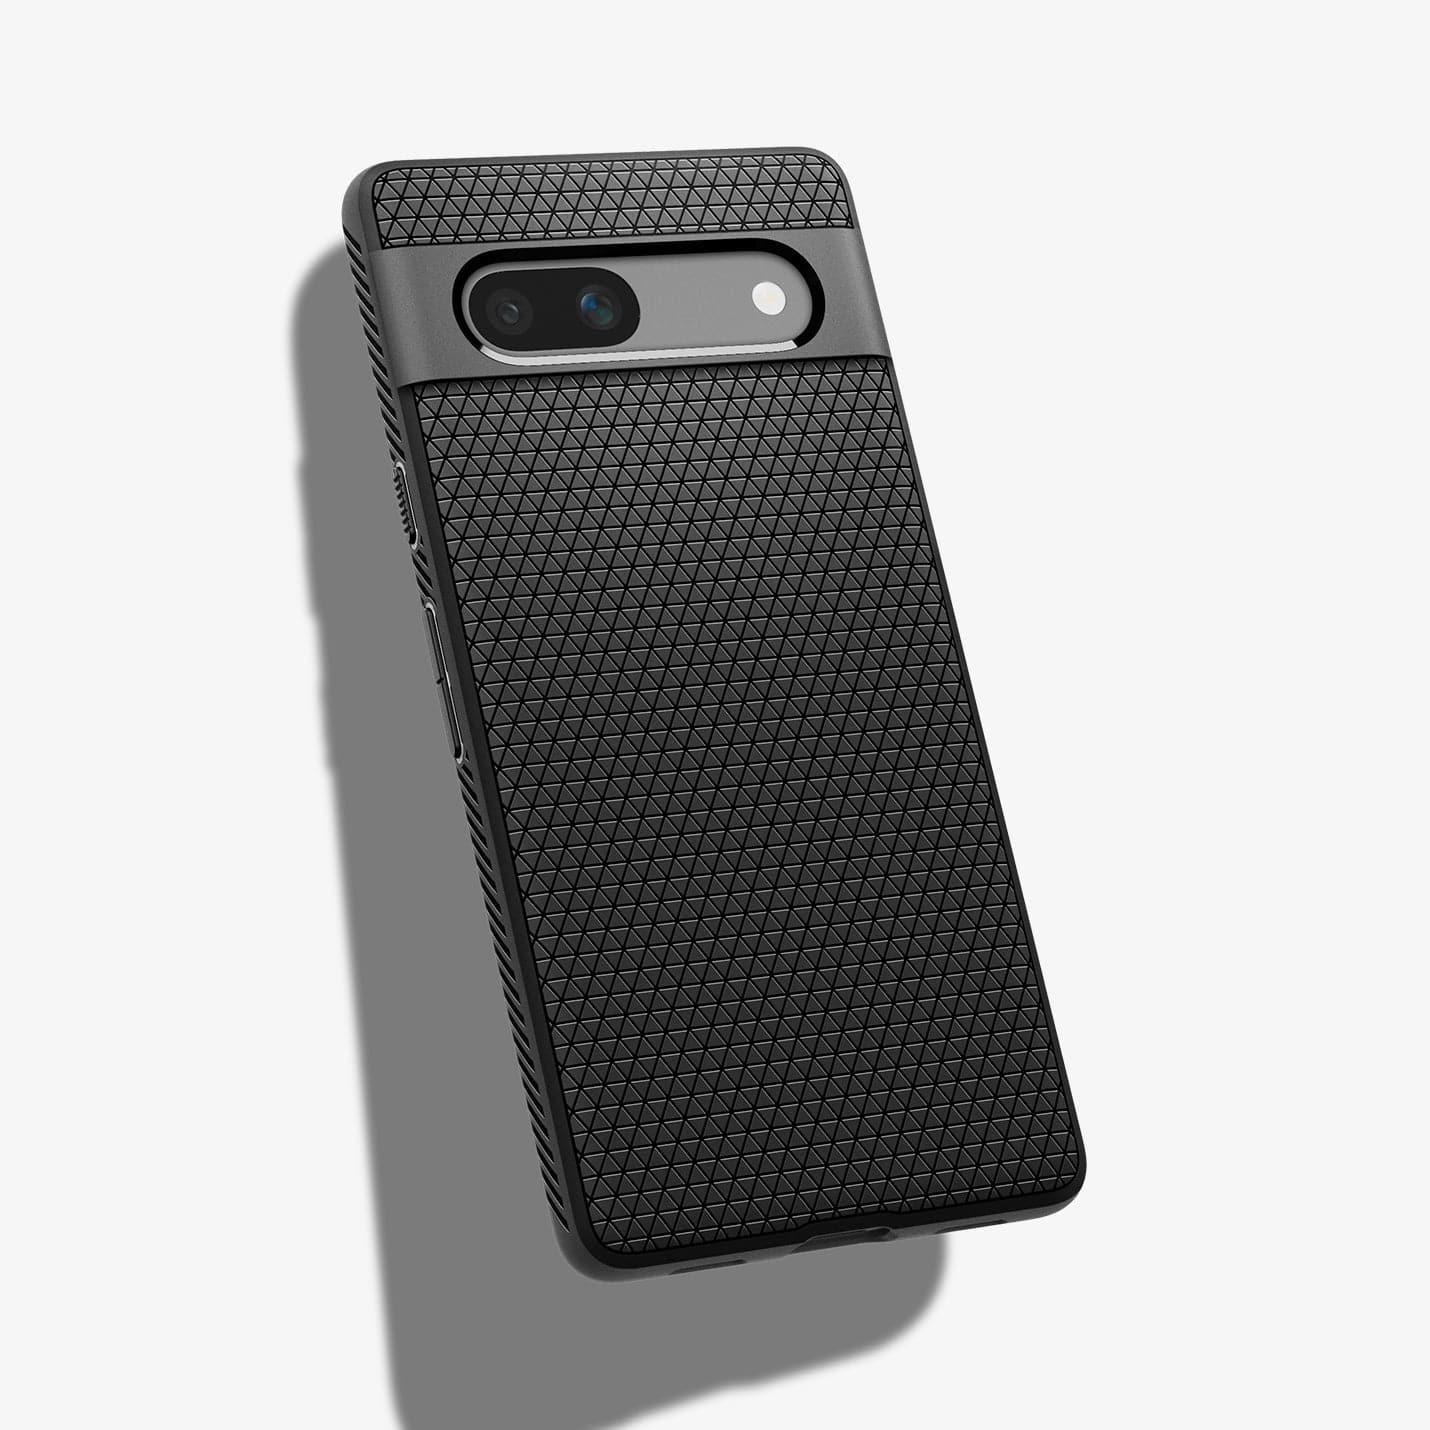 ACS05815 - Pixel 7a Case Liquid Air in matte black showing the back and partial side